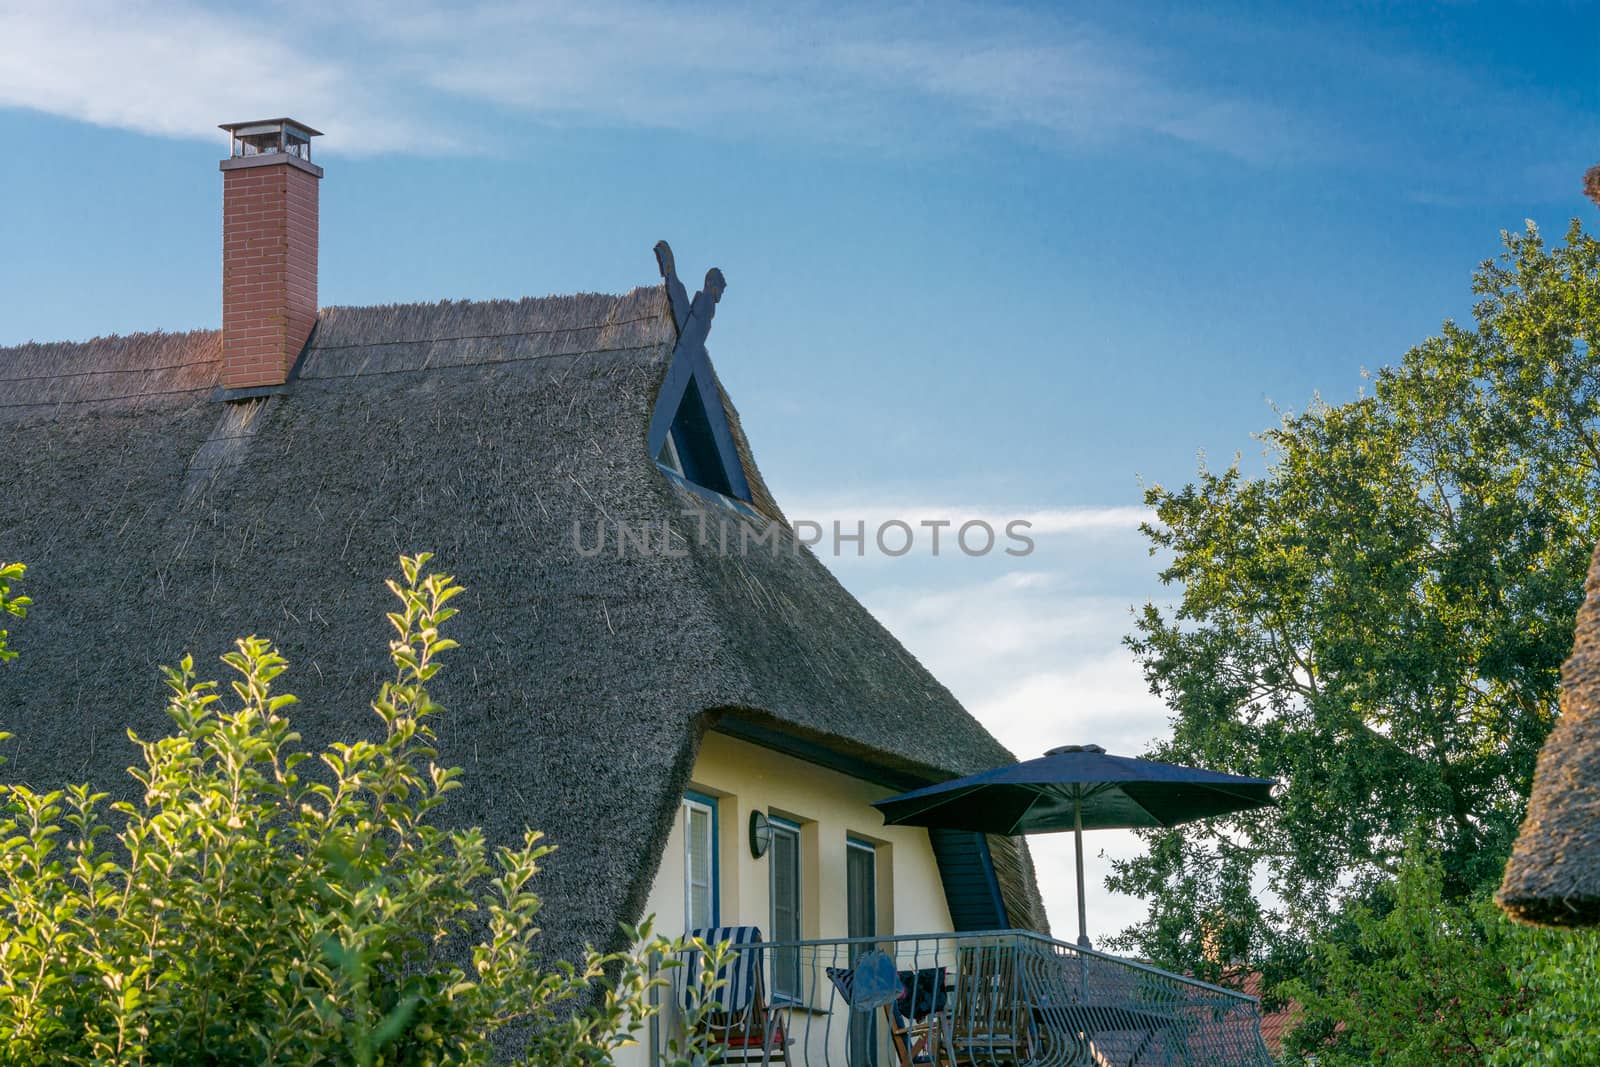 Houses on the Fischland-Darß with a thatched roof